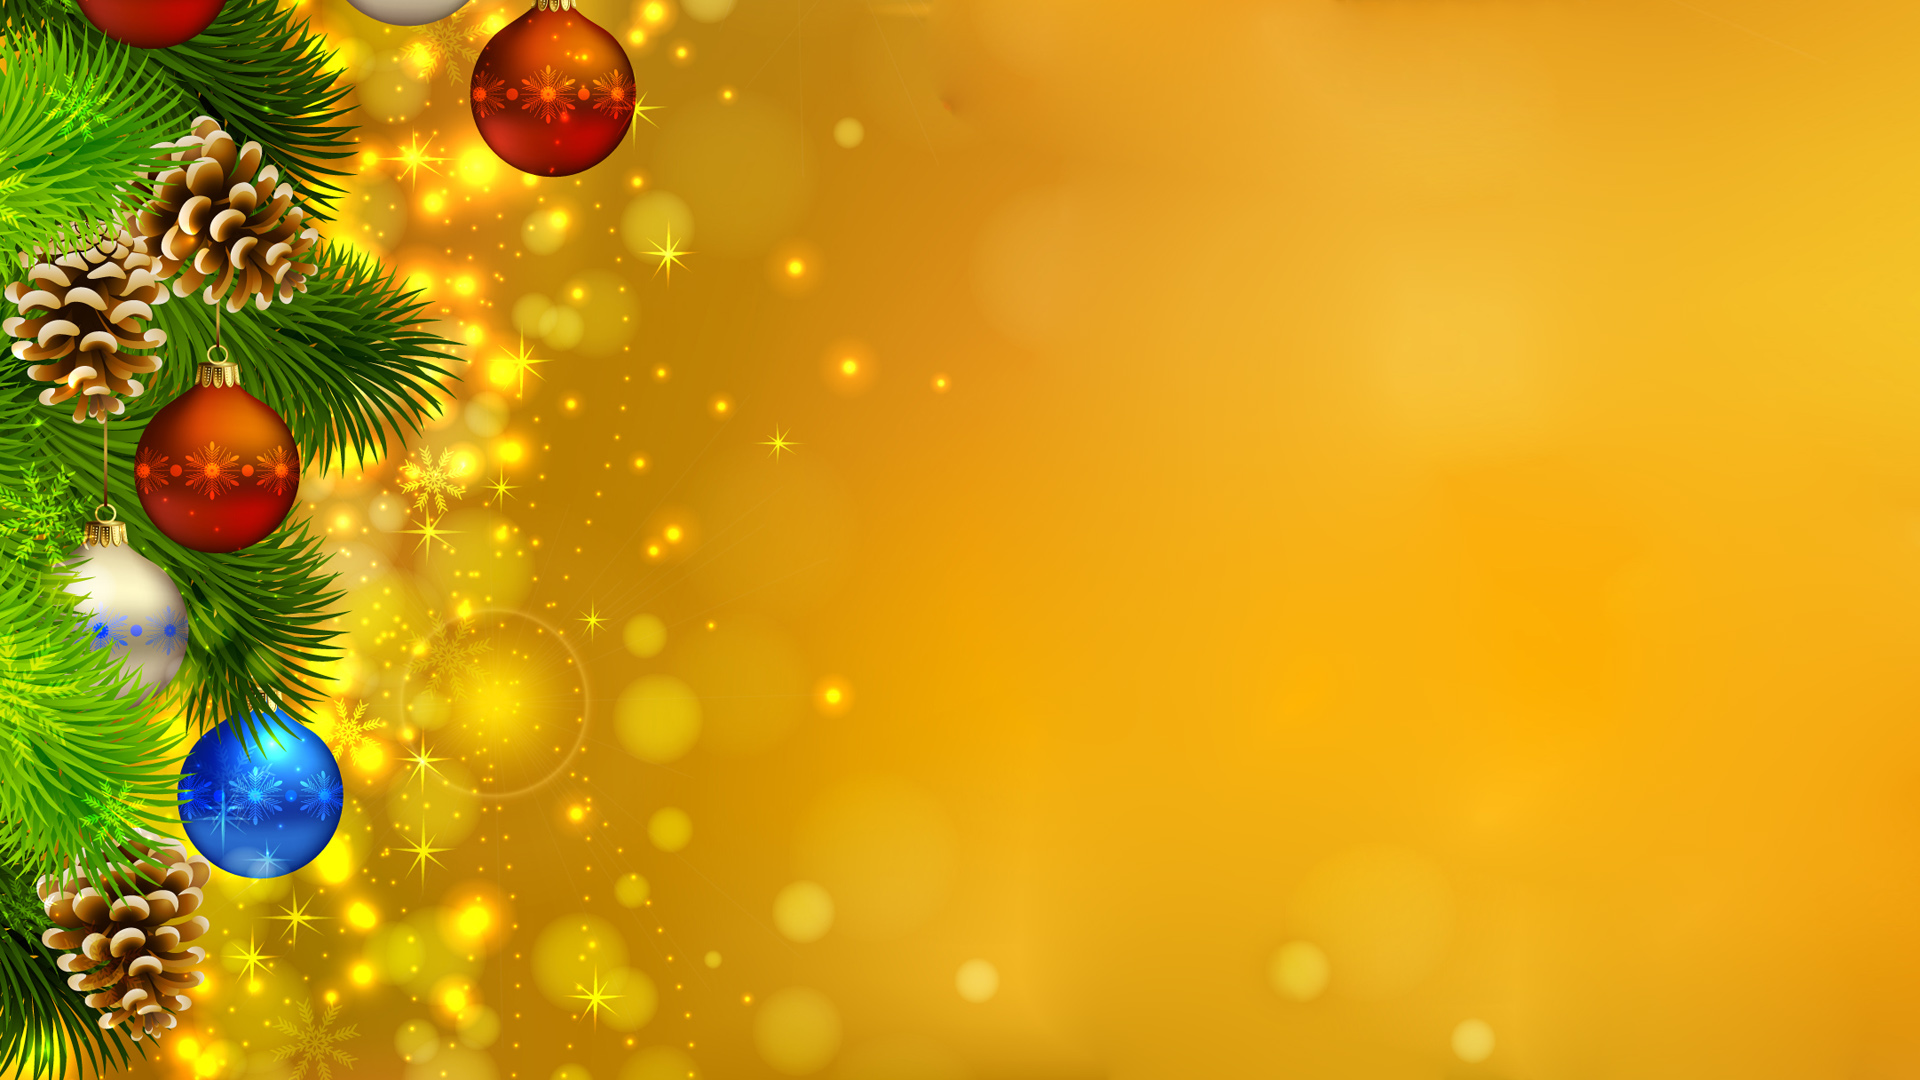 Christmas Wallpapers 75 images